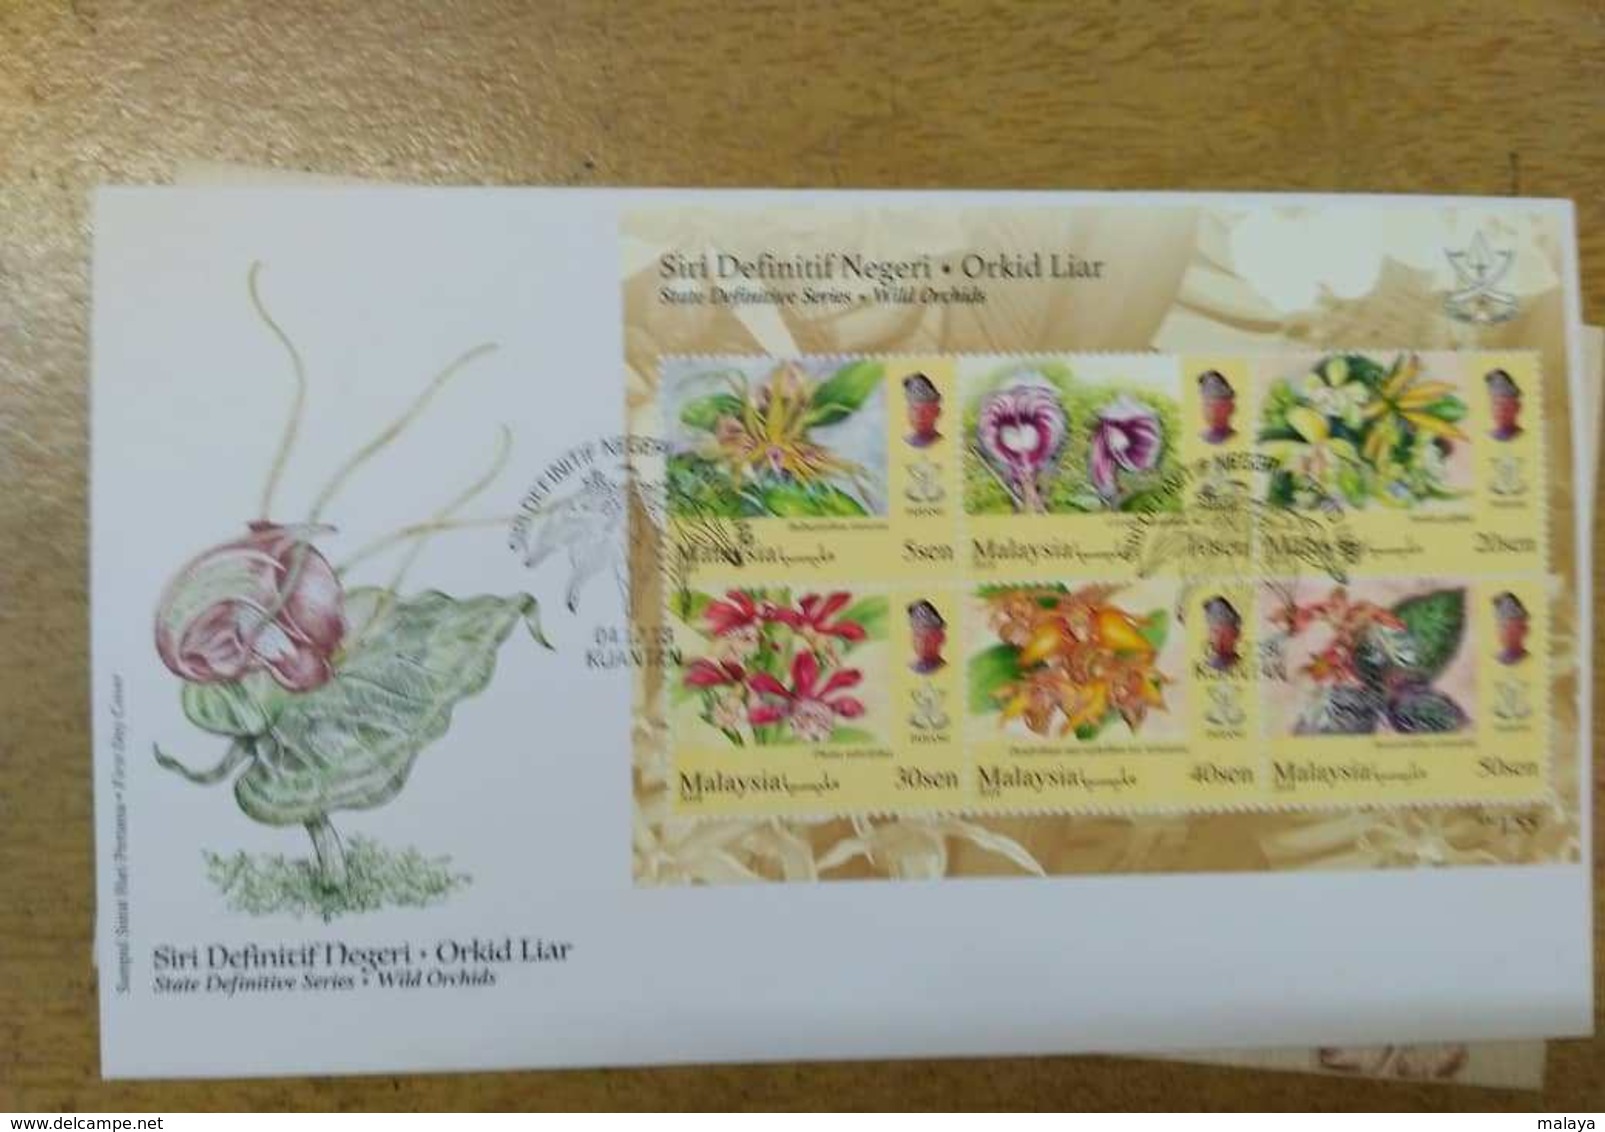 MALAYSIA 2018 FDC Cover Concordant WILD ORCHIDS definitive states series 14 MS Complete Sarawak Borneo Sabah Penang